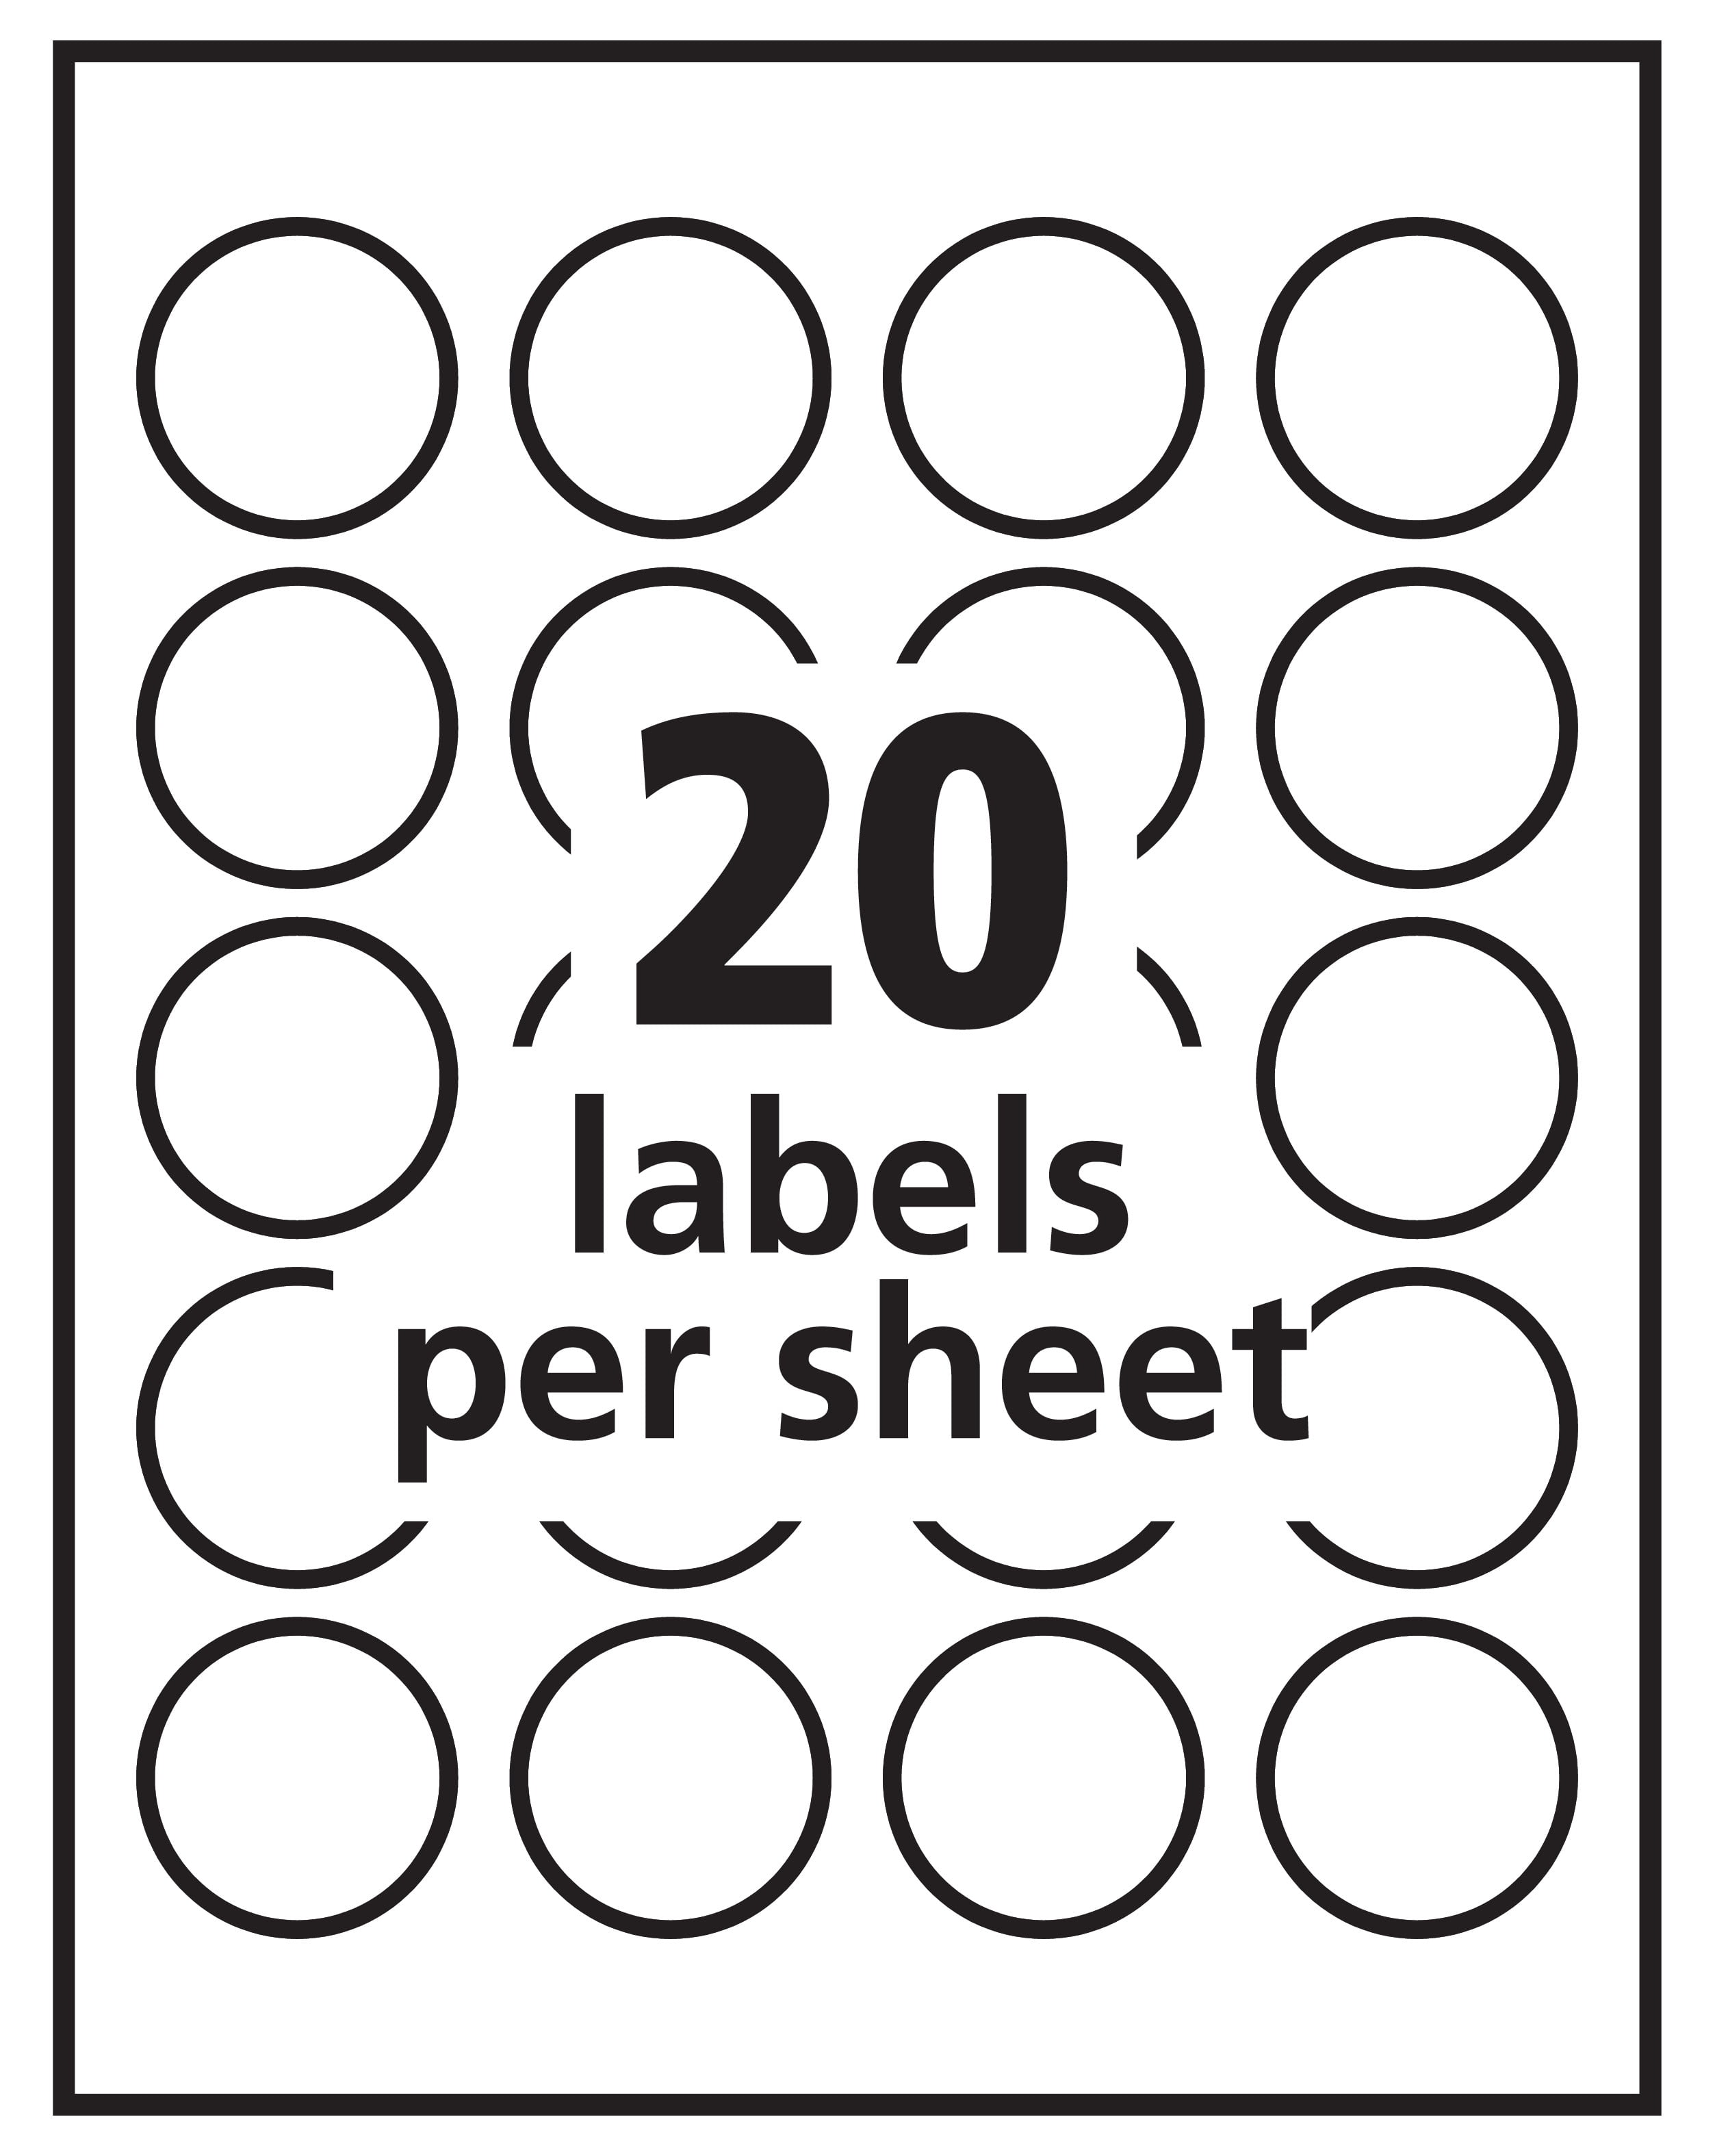 avery glossy clear round labels sure feed technology permanent adhesive 1 5 8 diameter 500 labels 6582 walmart com walmart com